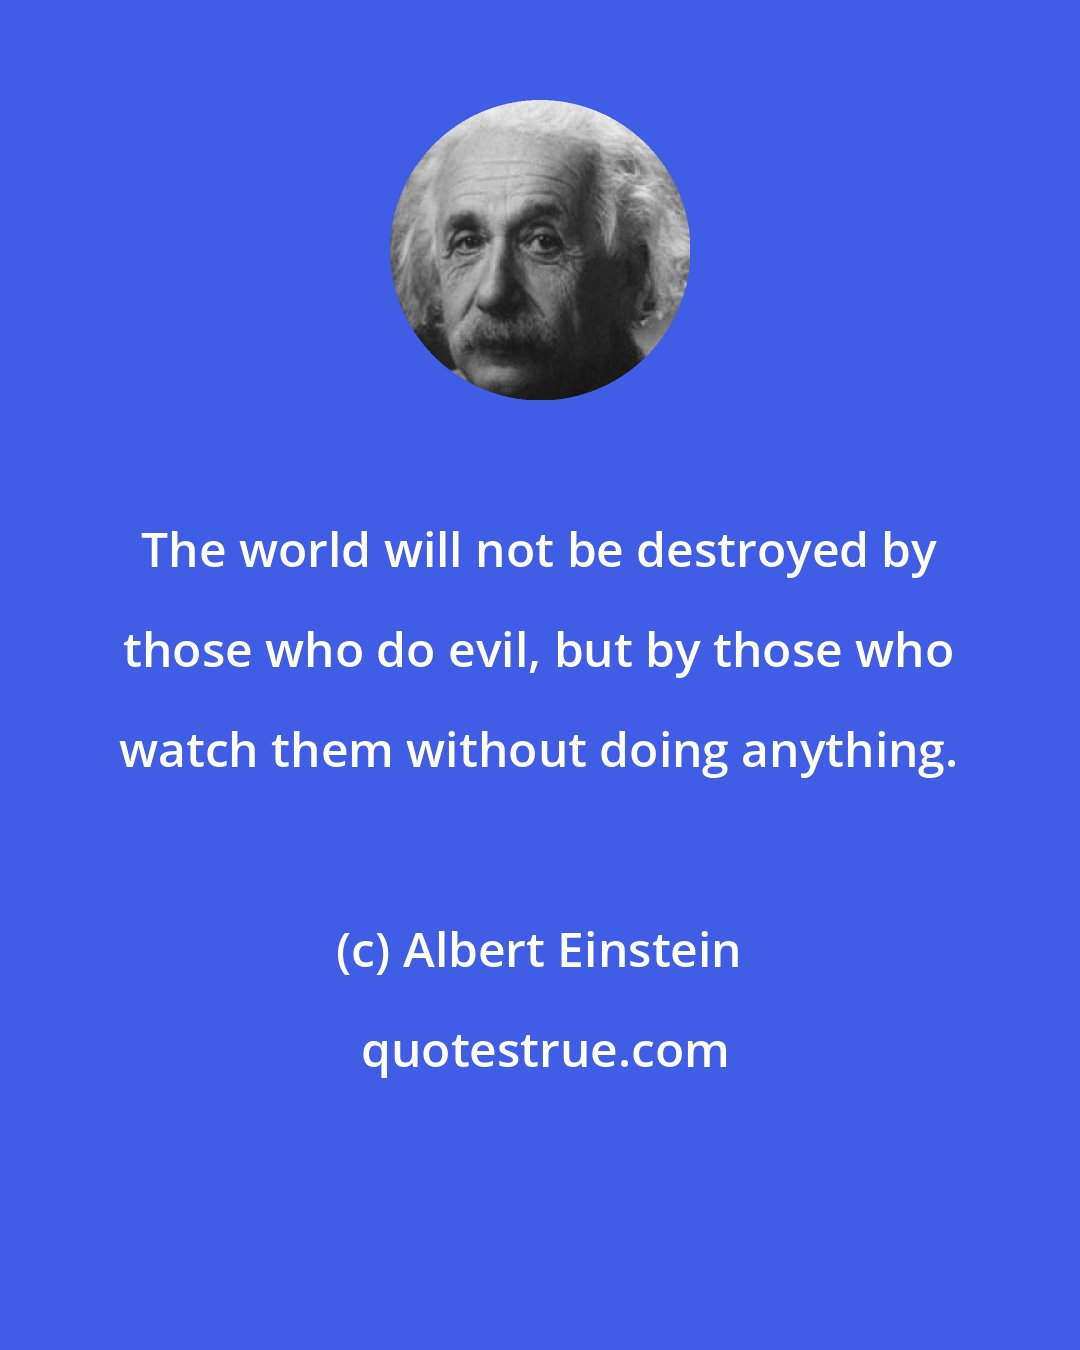 Albert Einstein: The world will not be destroyed by those who do evil, but by those who watch them without doing anything.